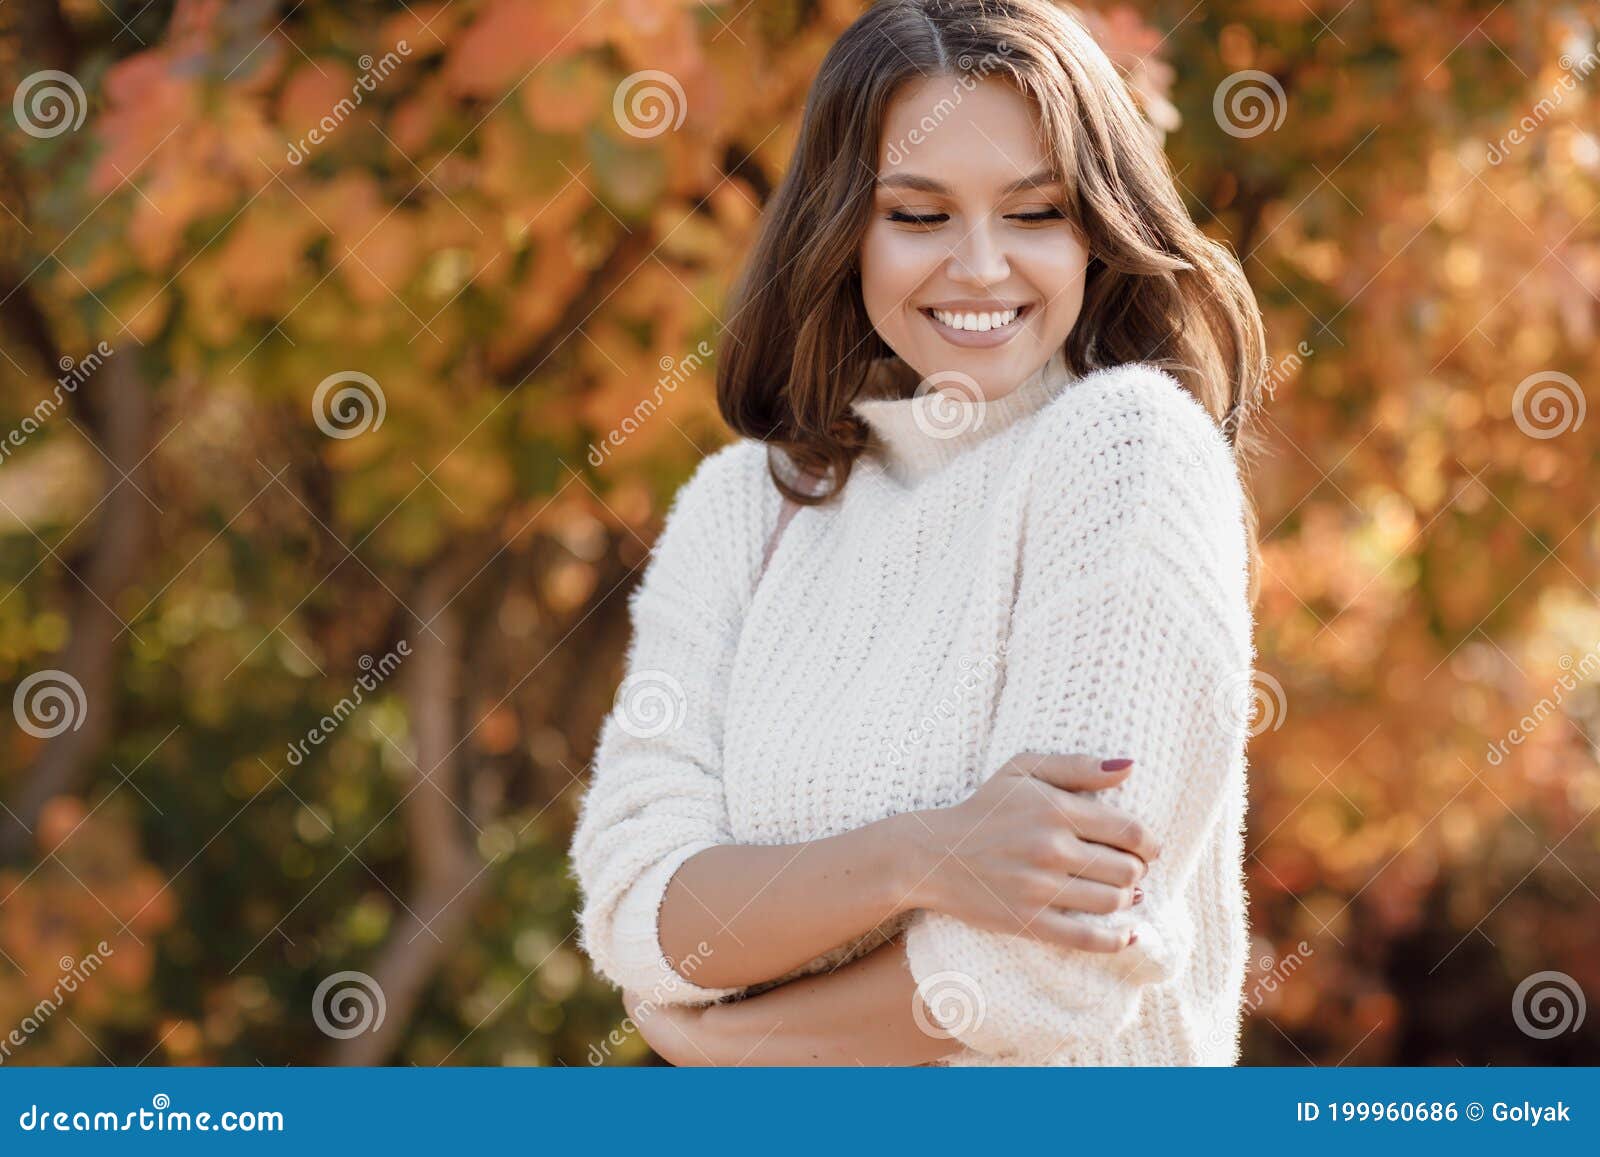 Closeup Autumn Portrait of a Happy Young Woman Outdoor Stock Photo ...